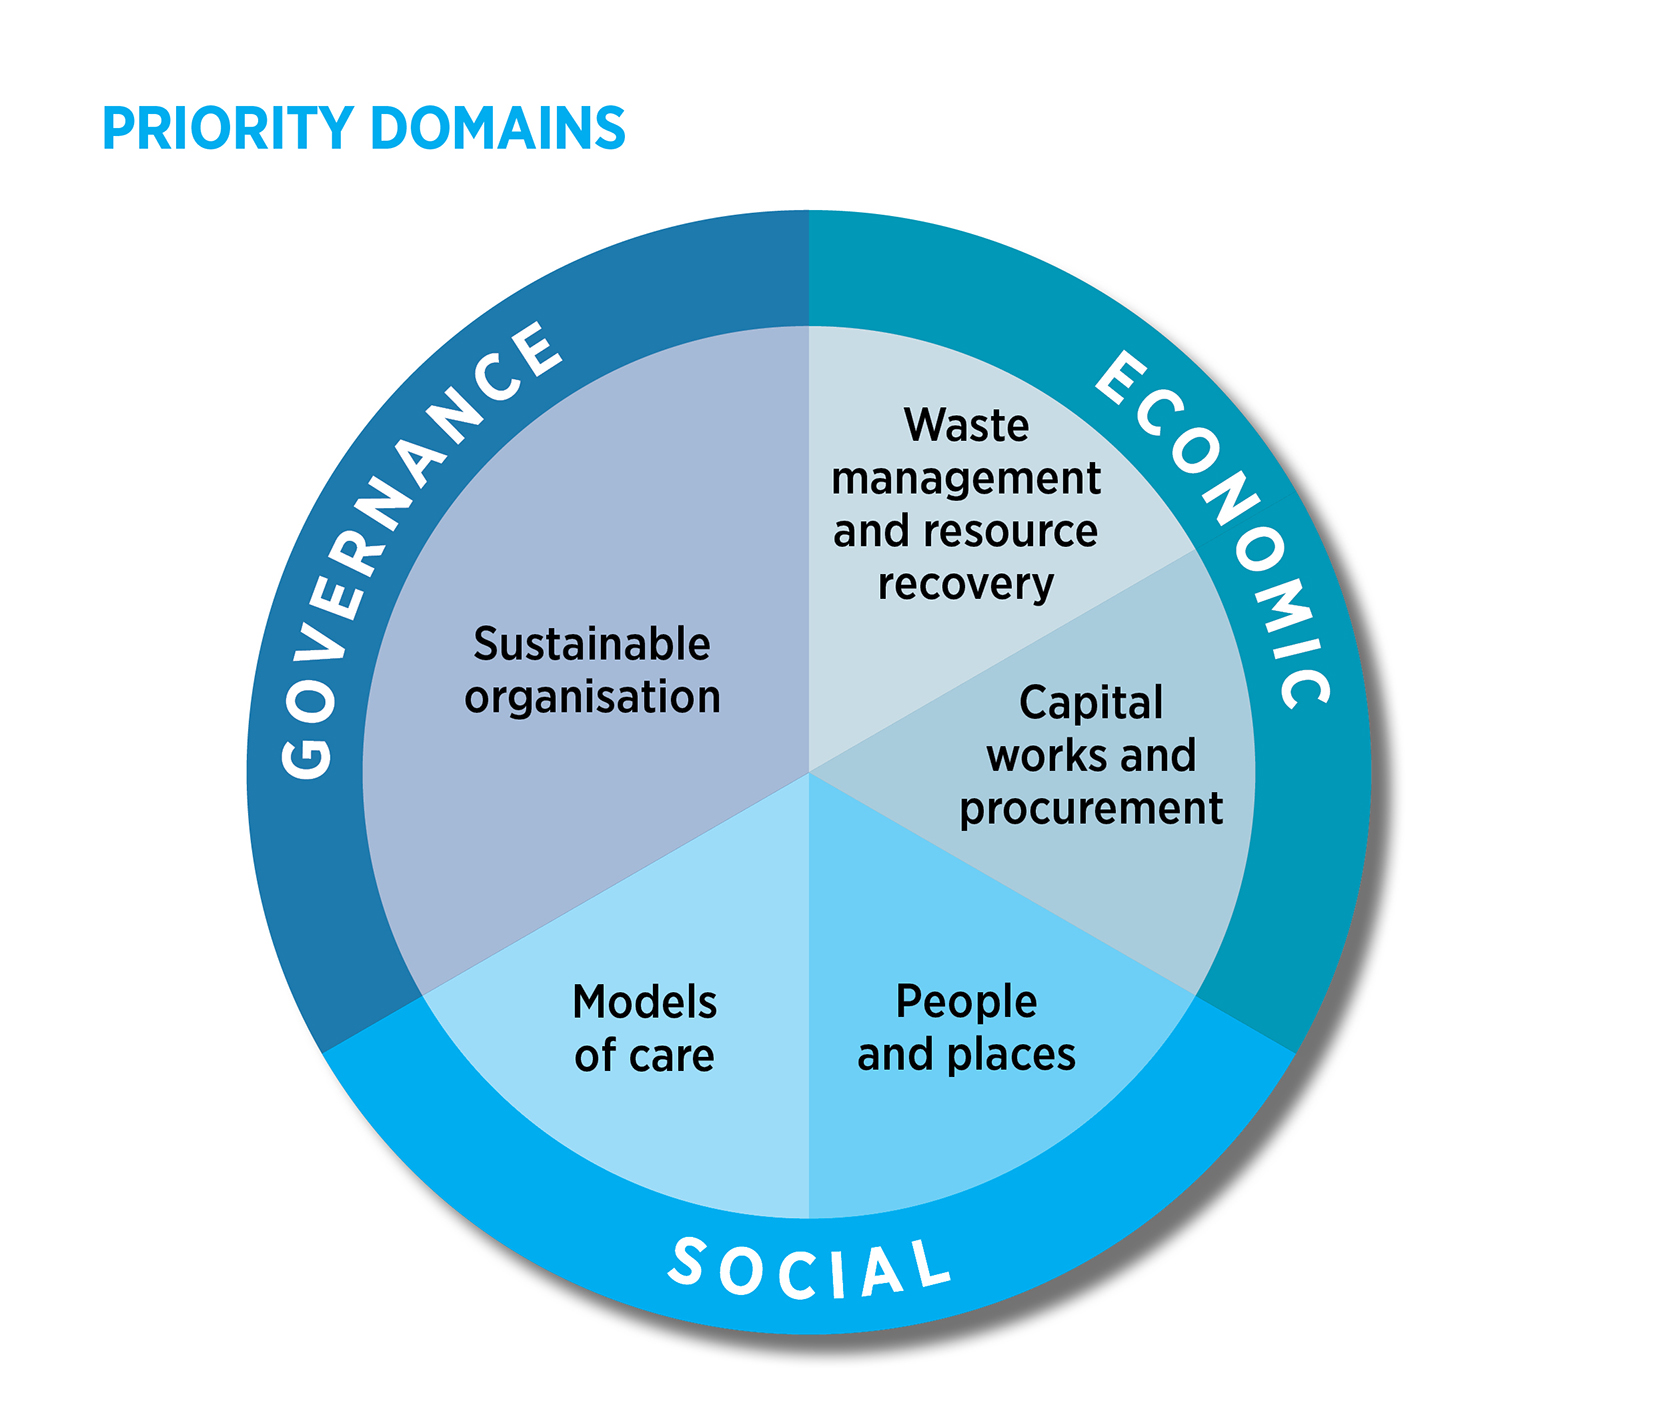 the priority domains shown in a pie graph image